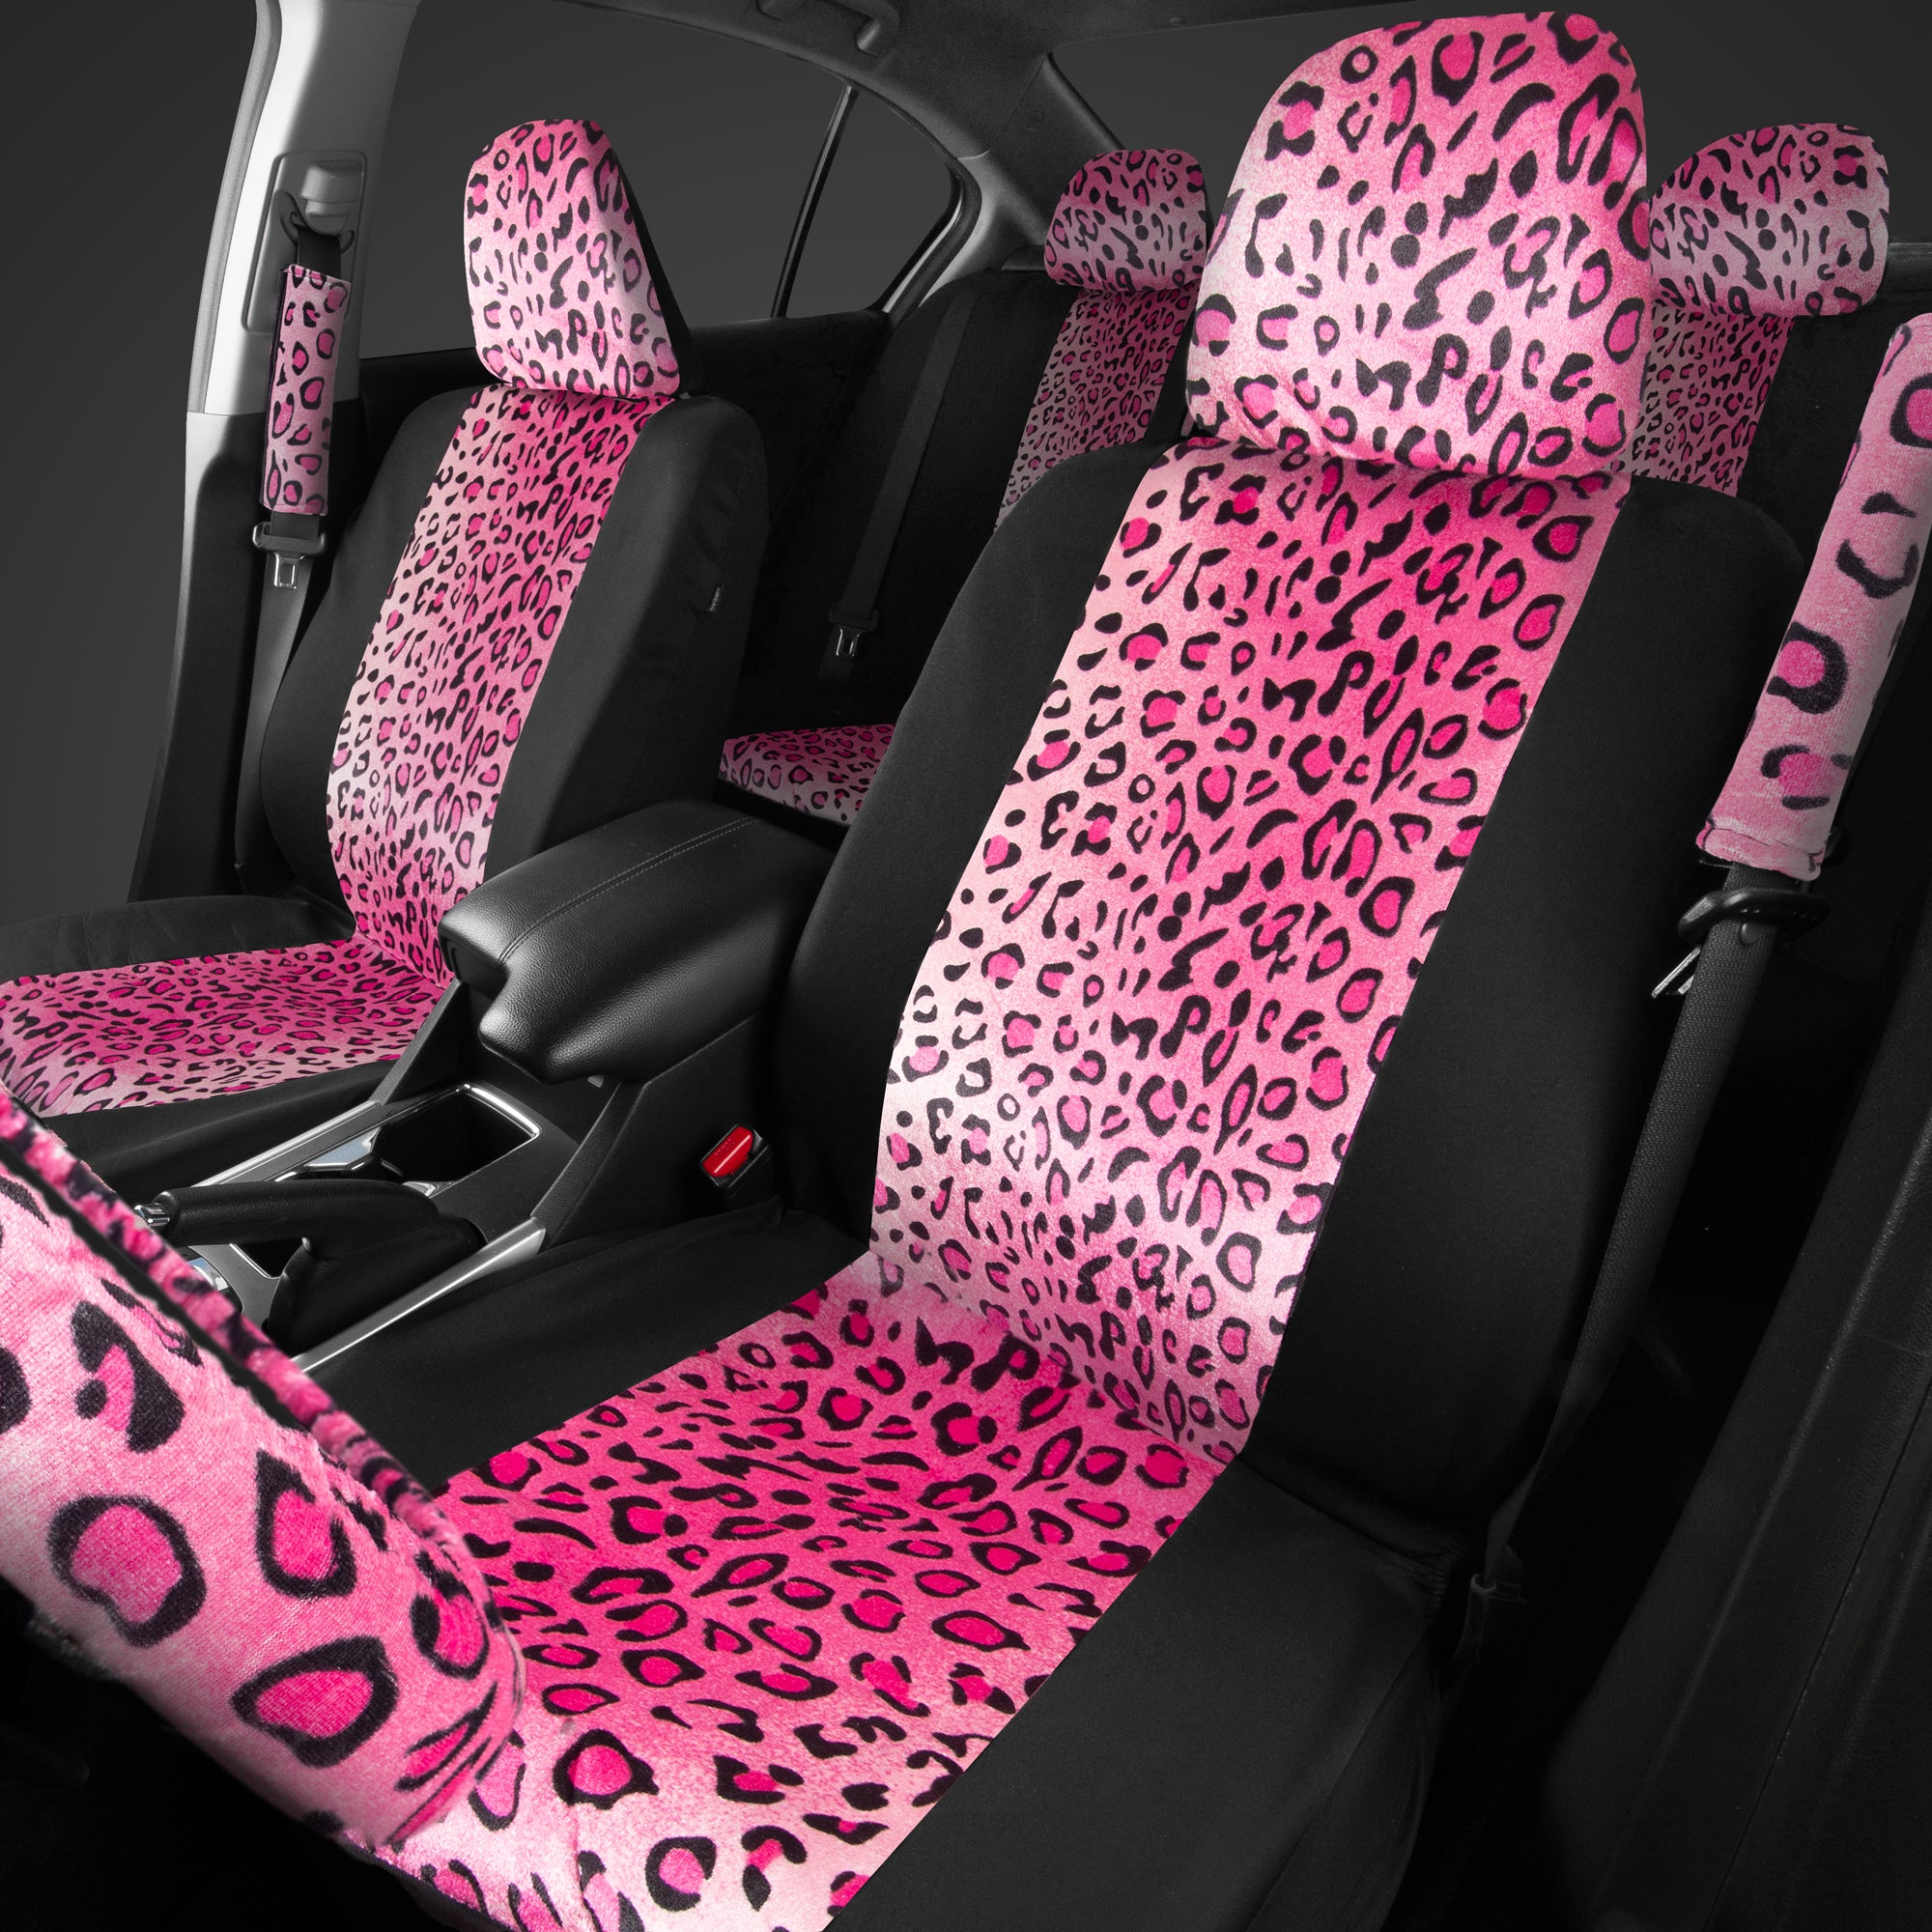 carXS Leopard Print Car Seat Covers Full Set, Includes Matching Seat Belt Pads and Steering Wheel Cover, Two-Tone Cheetah Hot Pink Seat Covers for Cars for Women, Car Seat Protector Interior Covers